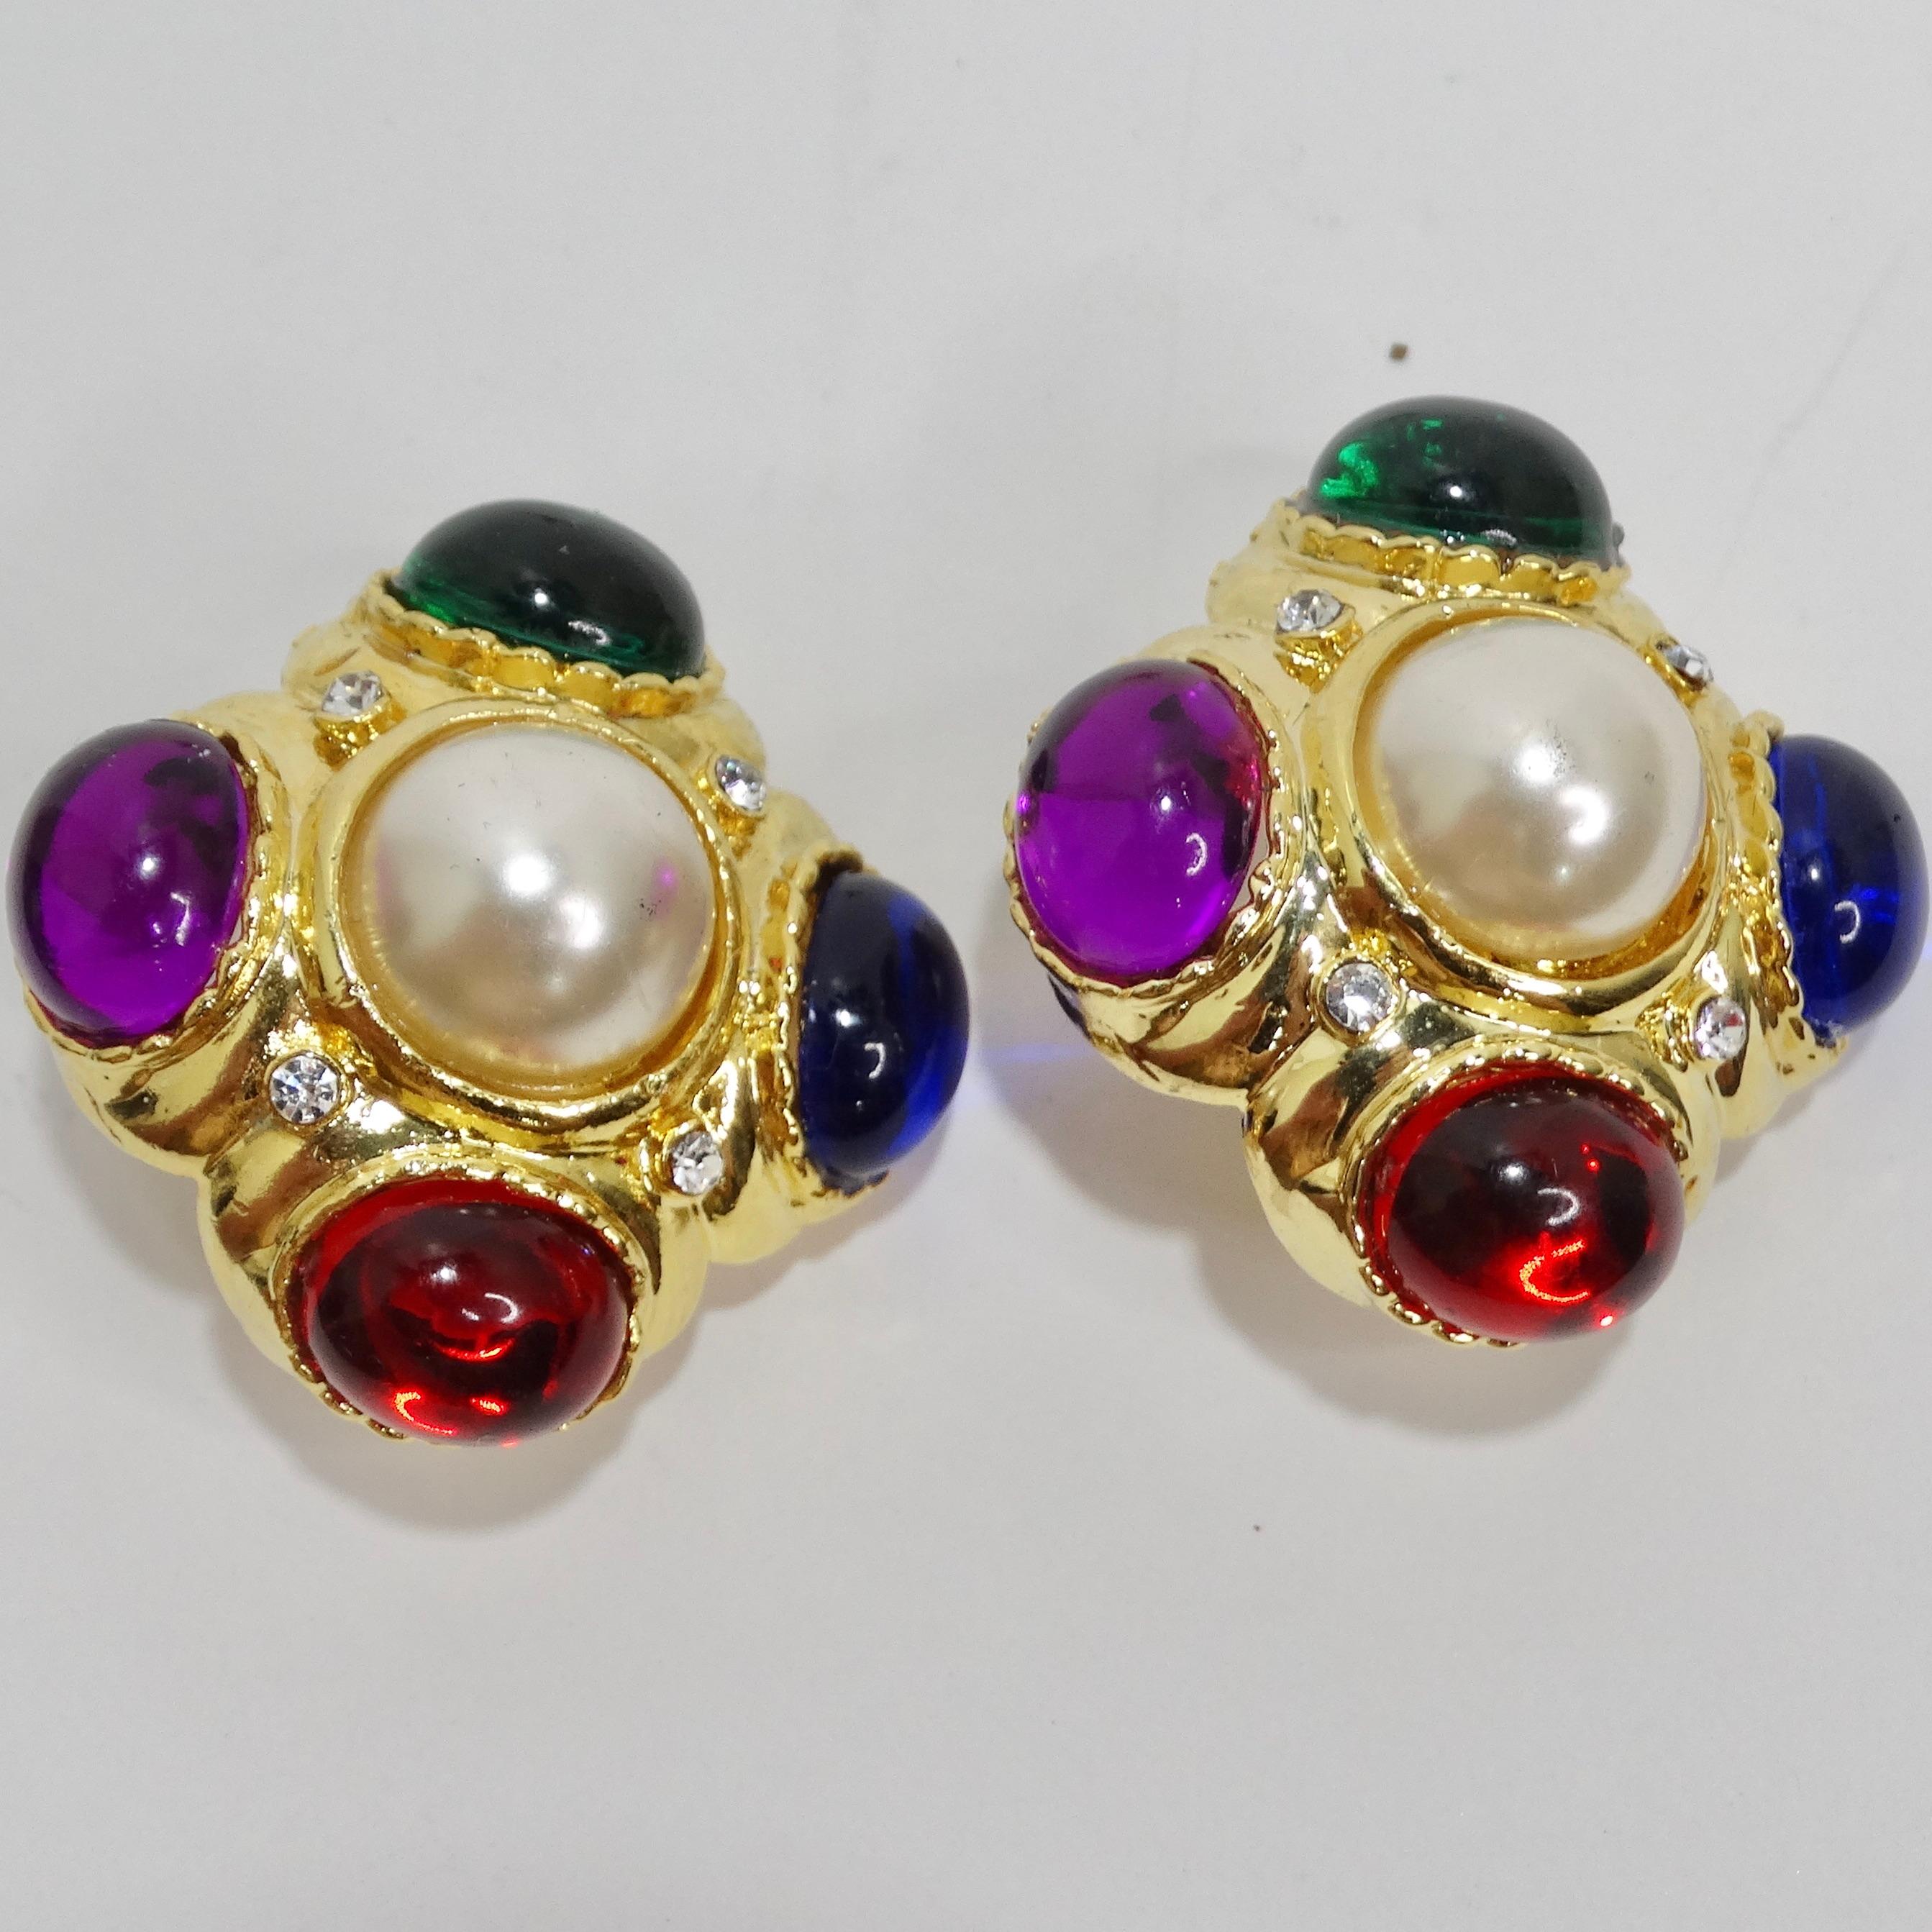 Step into the world of glamour with these 1980s 18K Gold-Plated Bulgari Inspired Clip-On Earrings. These eye-catching clip-on earrings are plated in radiant 18K gold and feature multicolored stones as the focal point, with a lustrous faux pearl at